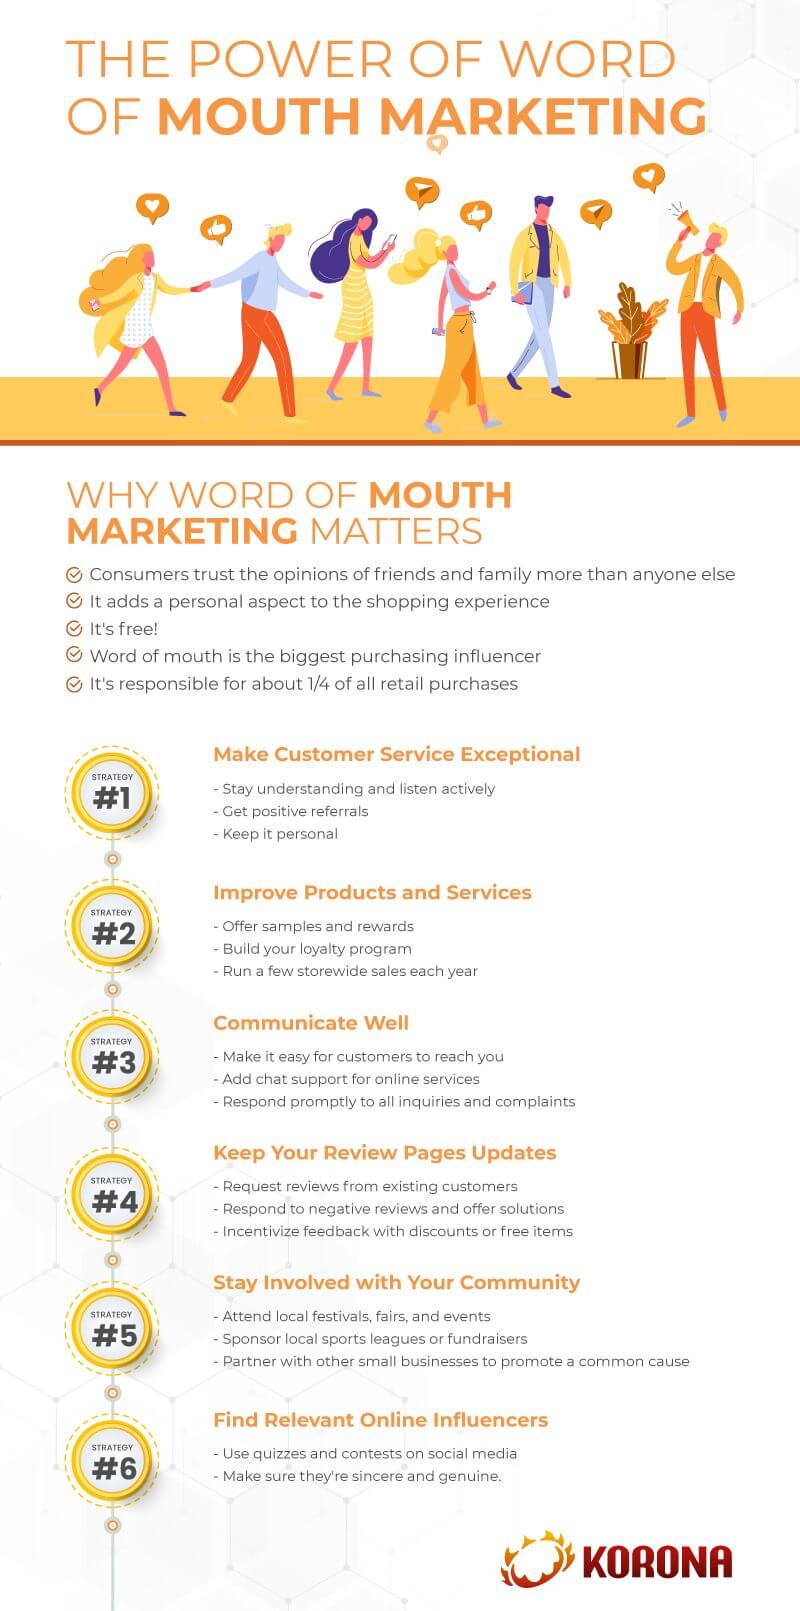 Infograph outlining 6 word of mouth marketing strategies and why it's so important for small businesses